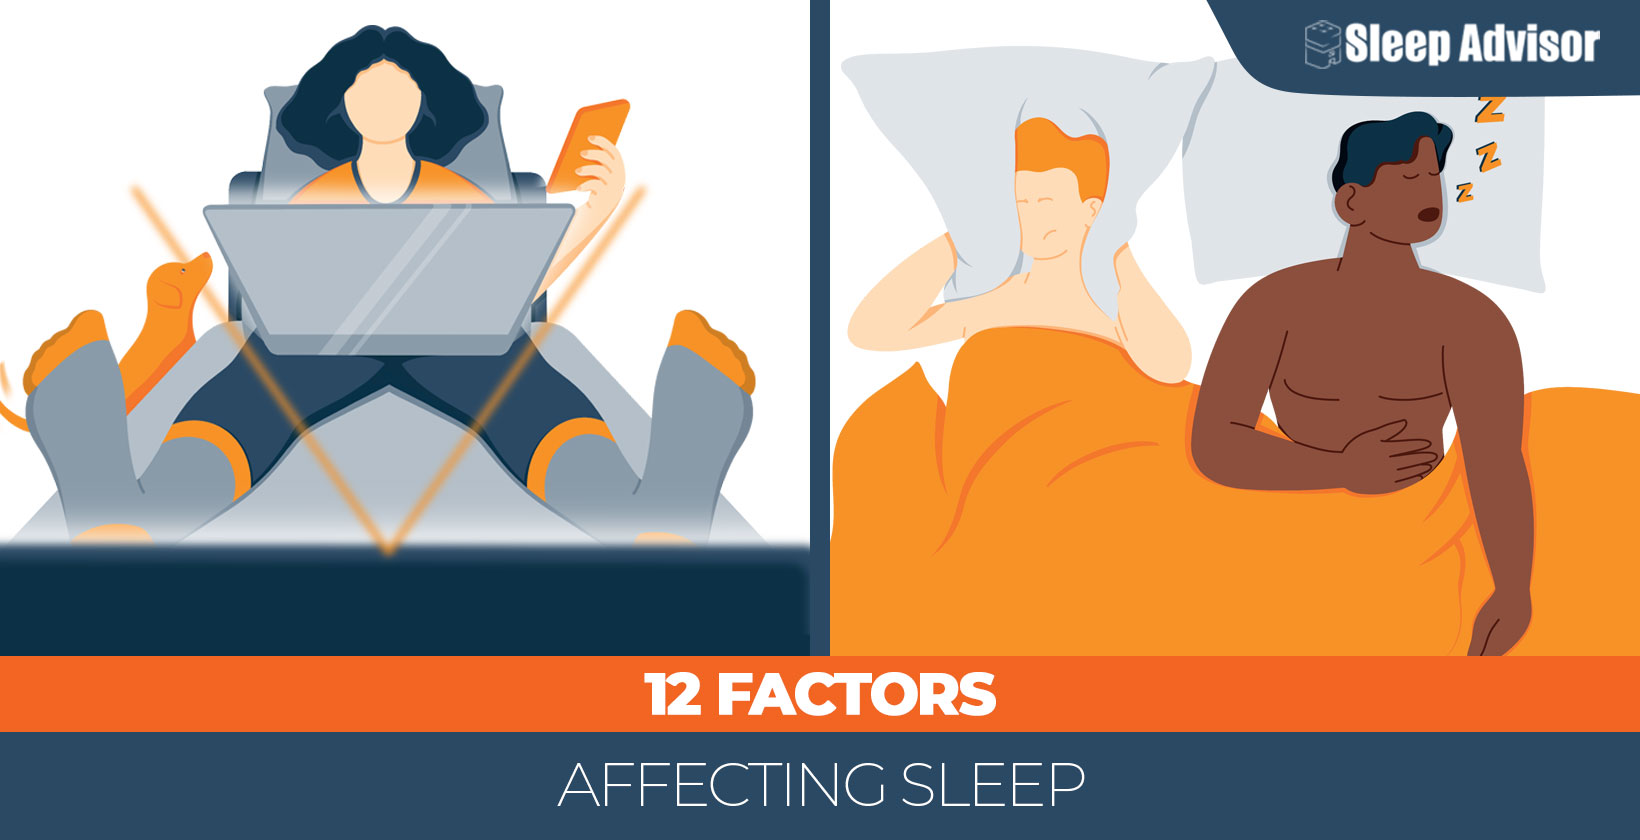 What factors can interfere with entering or maintaining light sleep?